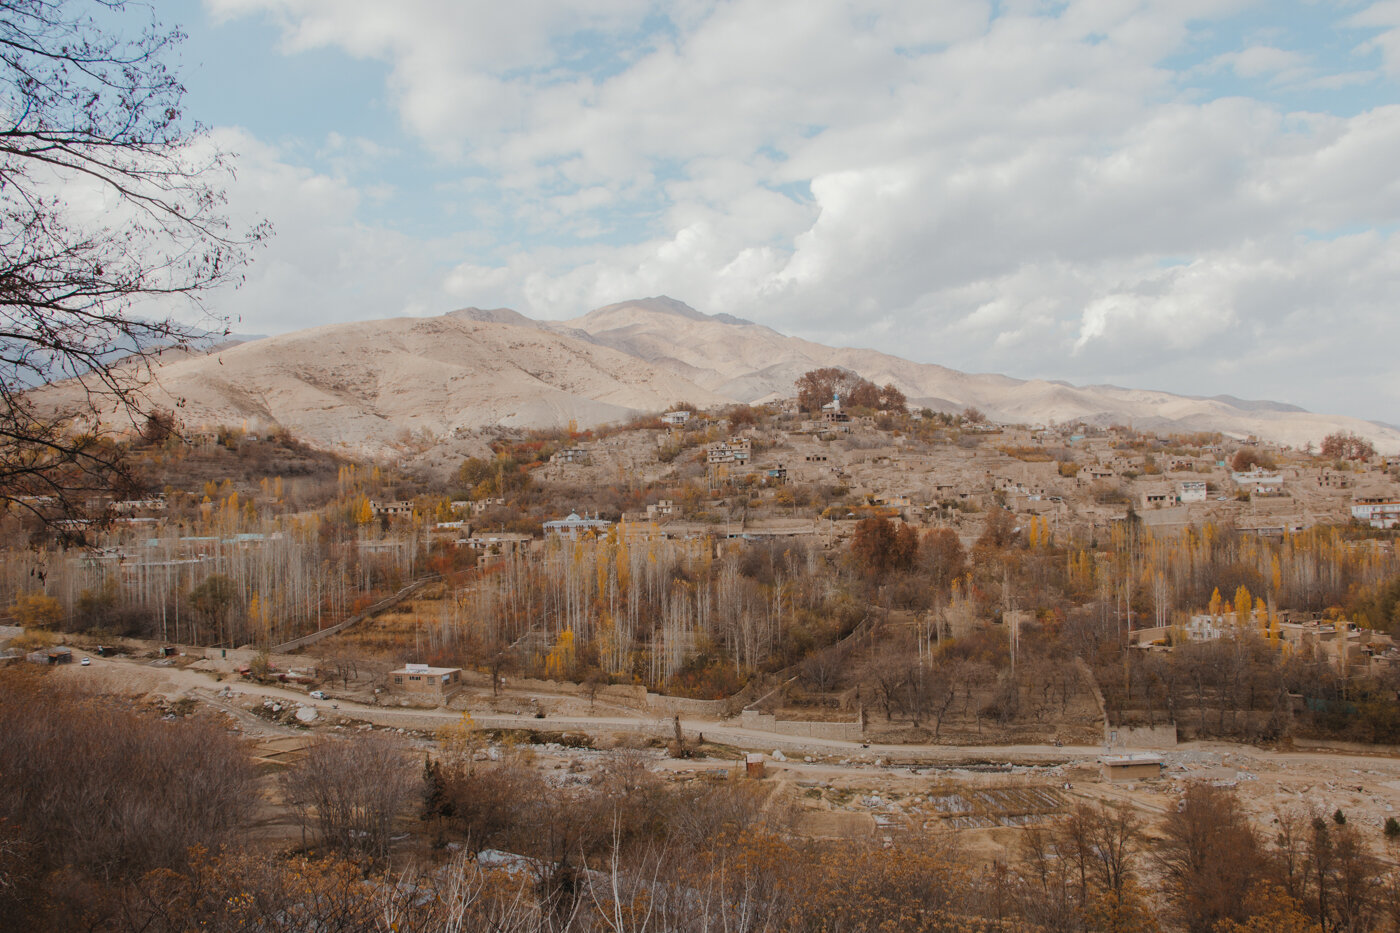  From a day trip to Istālif. The village was unfortunately destroyed due to conflict in the past decades, but still retains its renown as one of the most beautiful places in Afghanistan. 